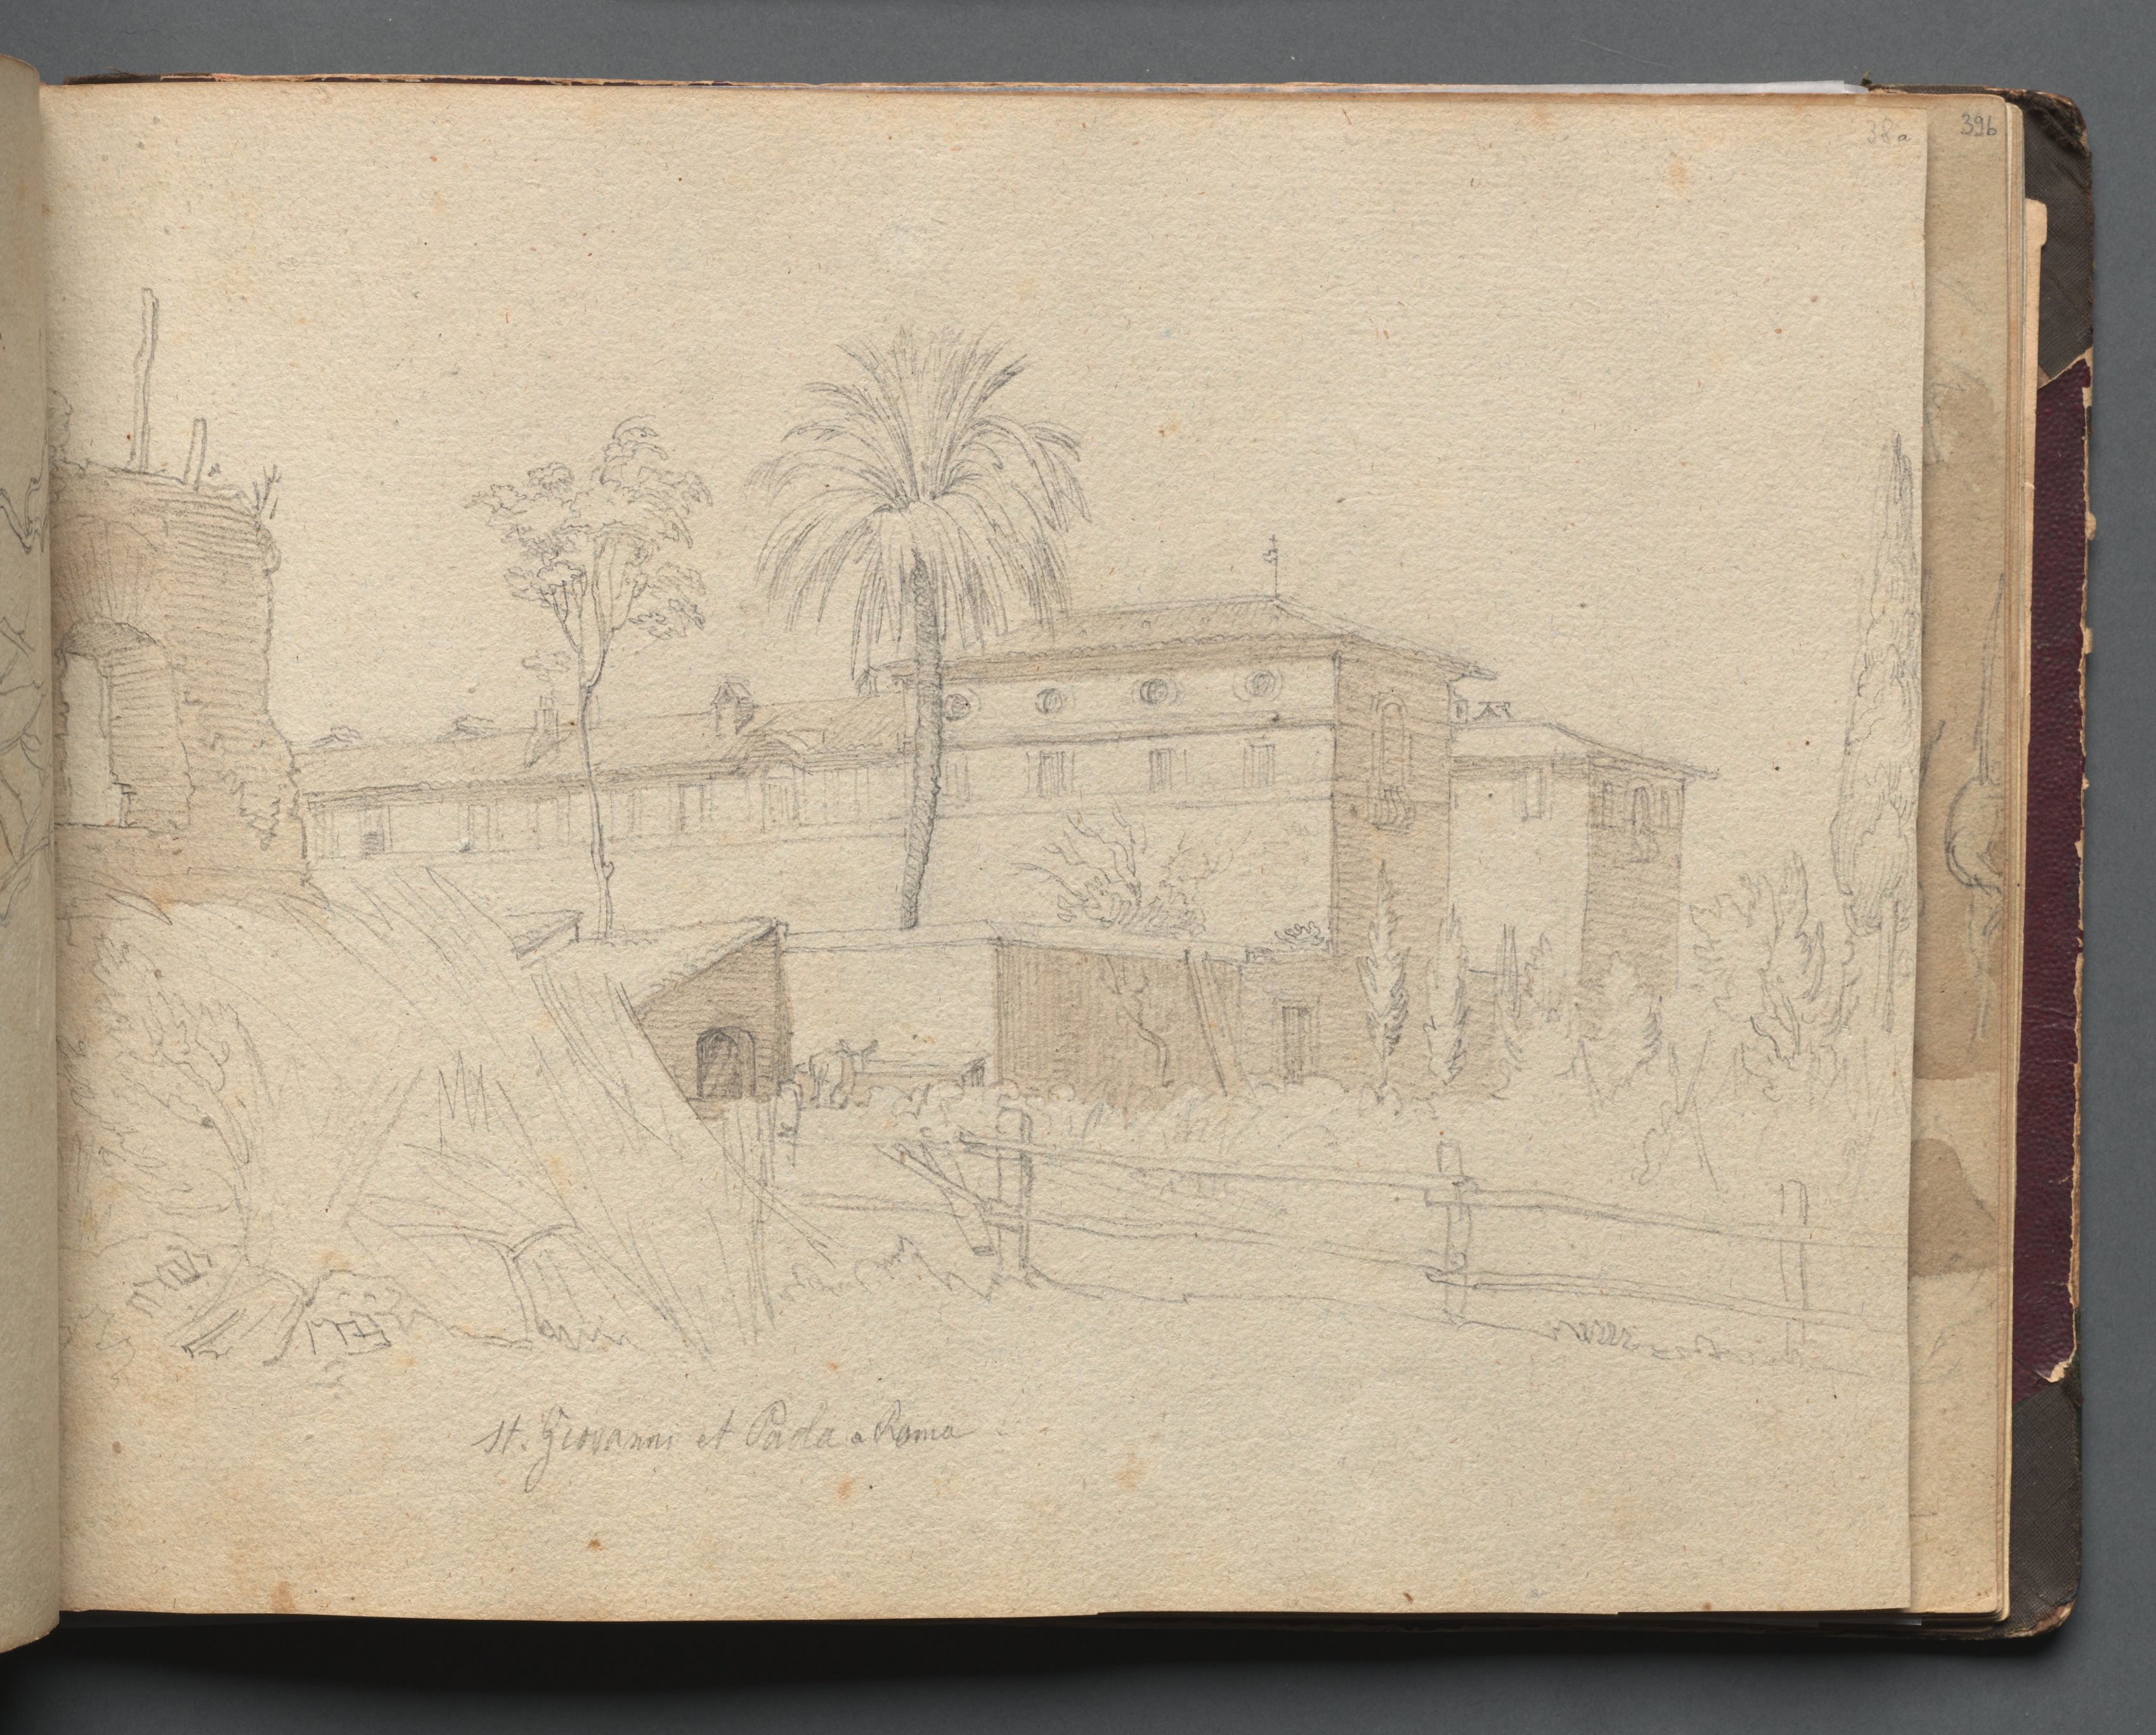 Album with Views of Rome and Surroundings, Landscape Studies, page 38a: :St. Giovanni e Paolo, Rome"